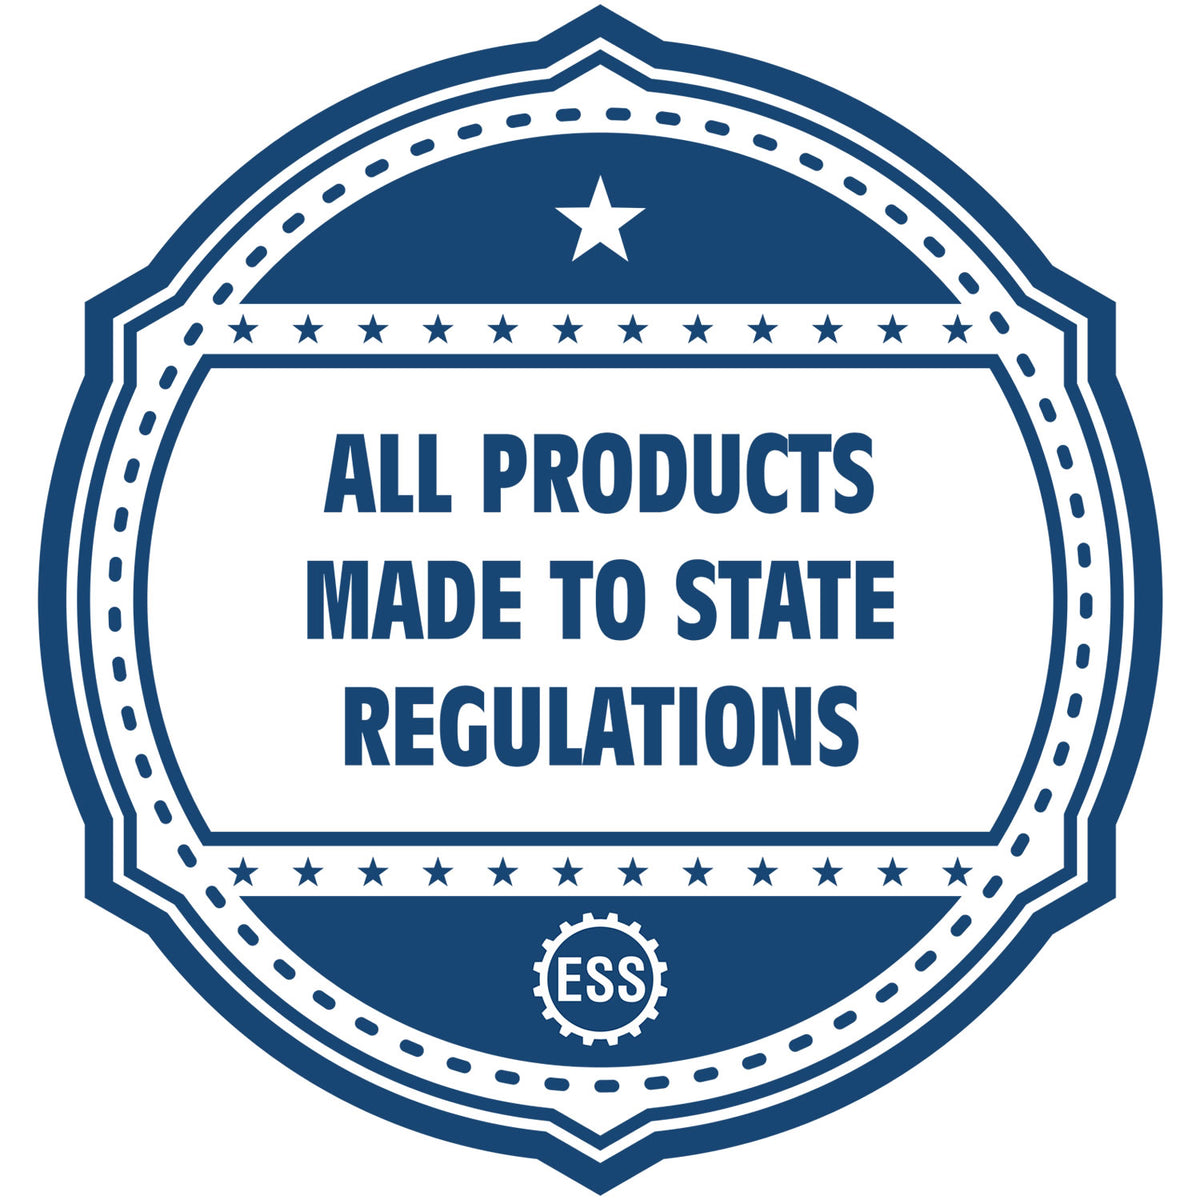 A blue icon or badge for the Slim Pre-Inked Louisiana Professional Geologist Seal Stamp showing that this product is made in compliance with state regulations.